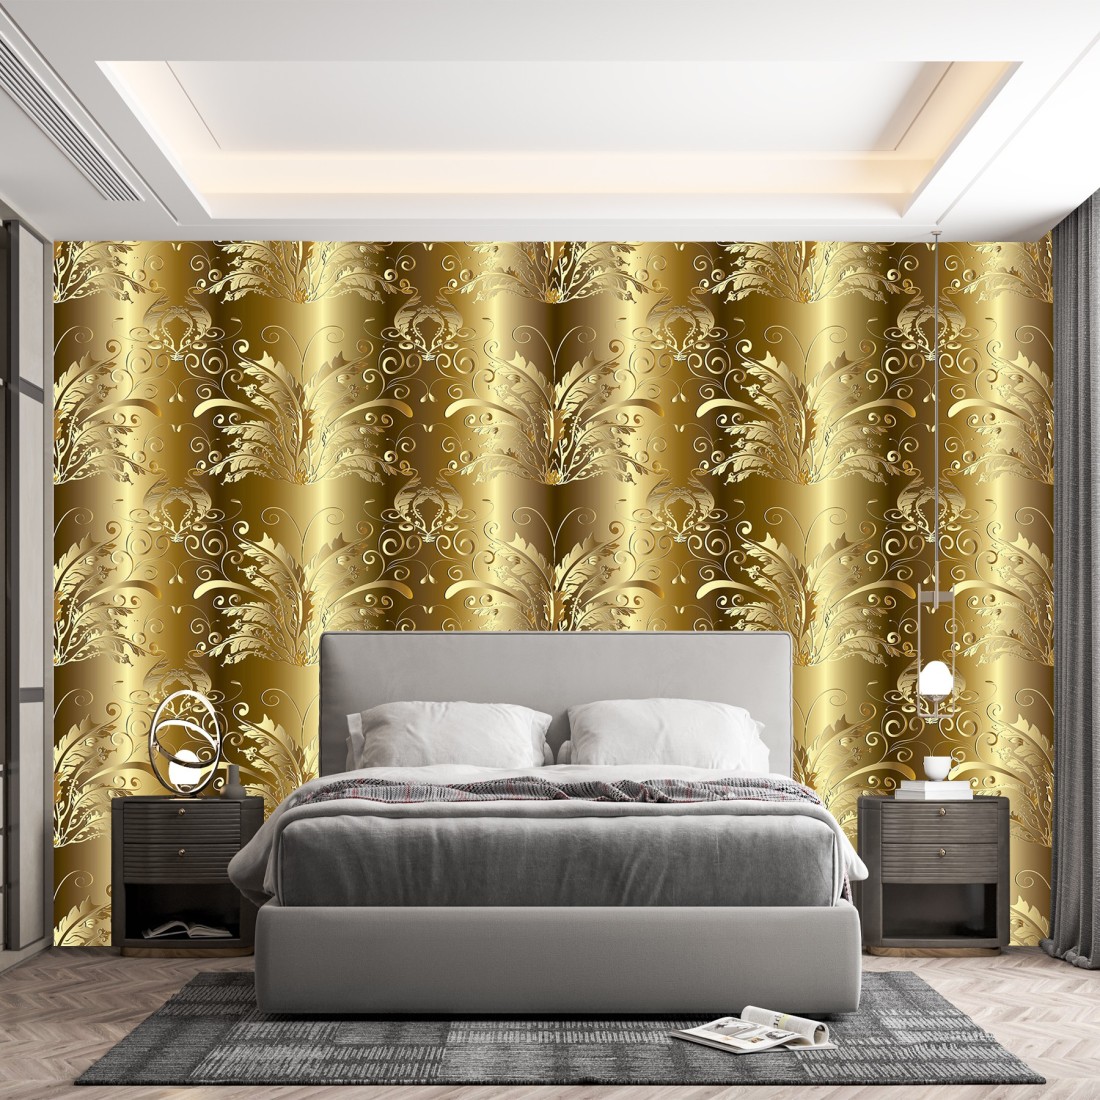 A Wallpaper Accent Wall  Brunch at Saks  White gold bedroom Gold bedroom  Contemporary bedroom